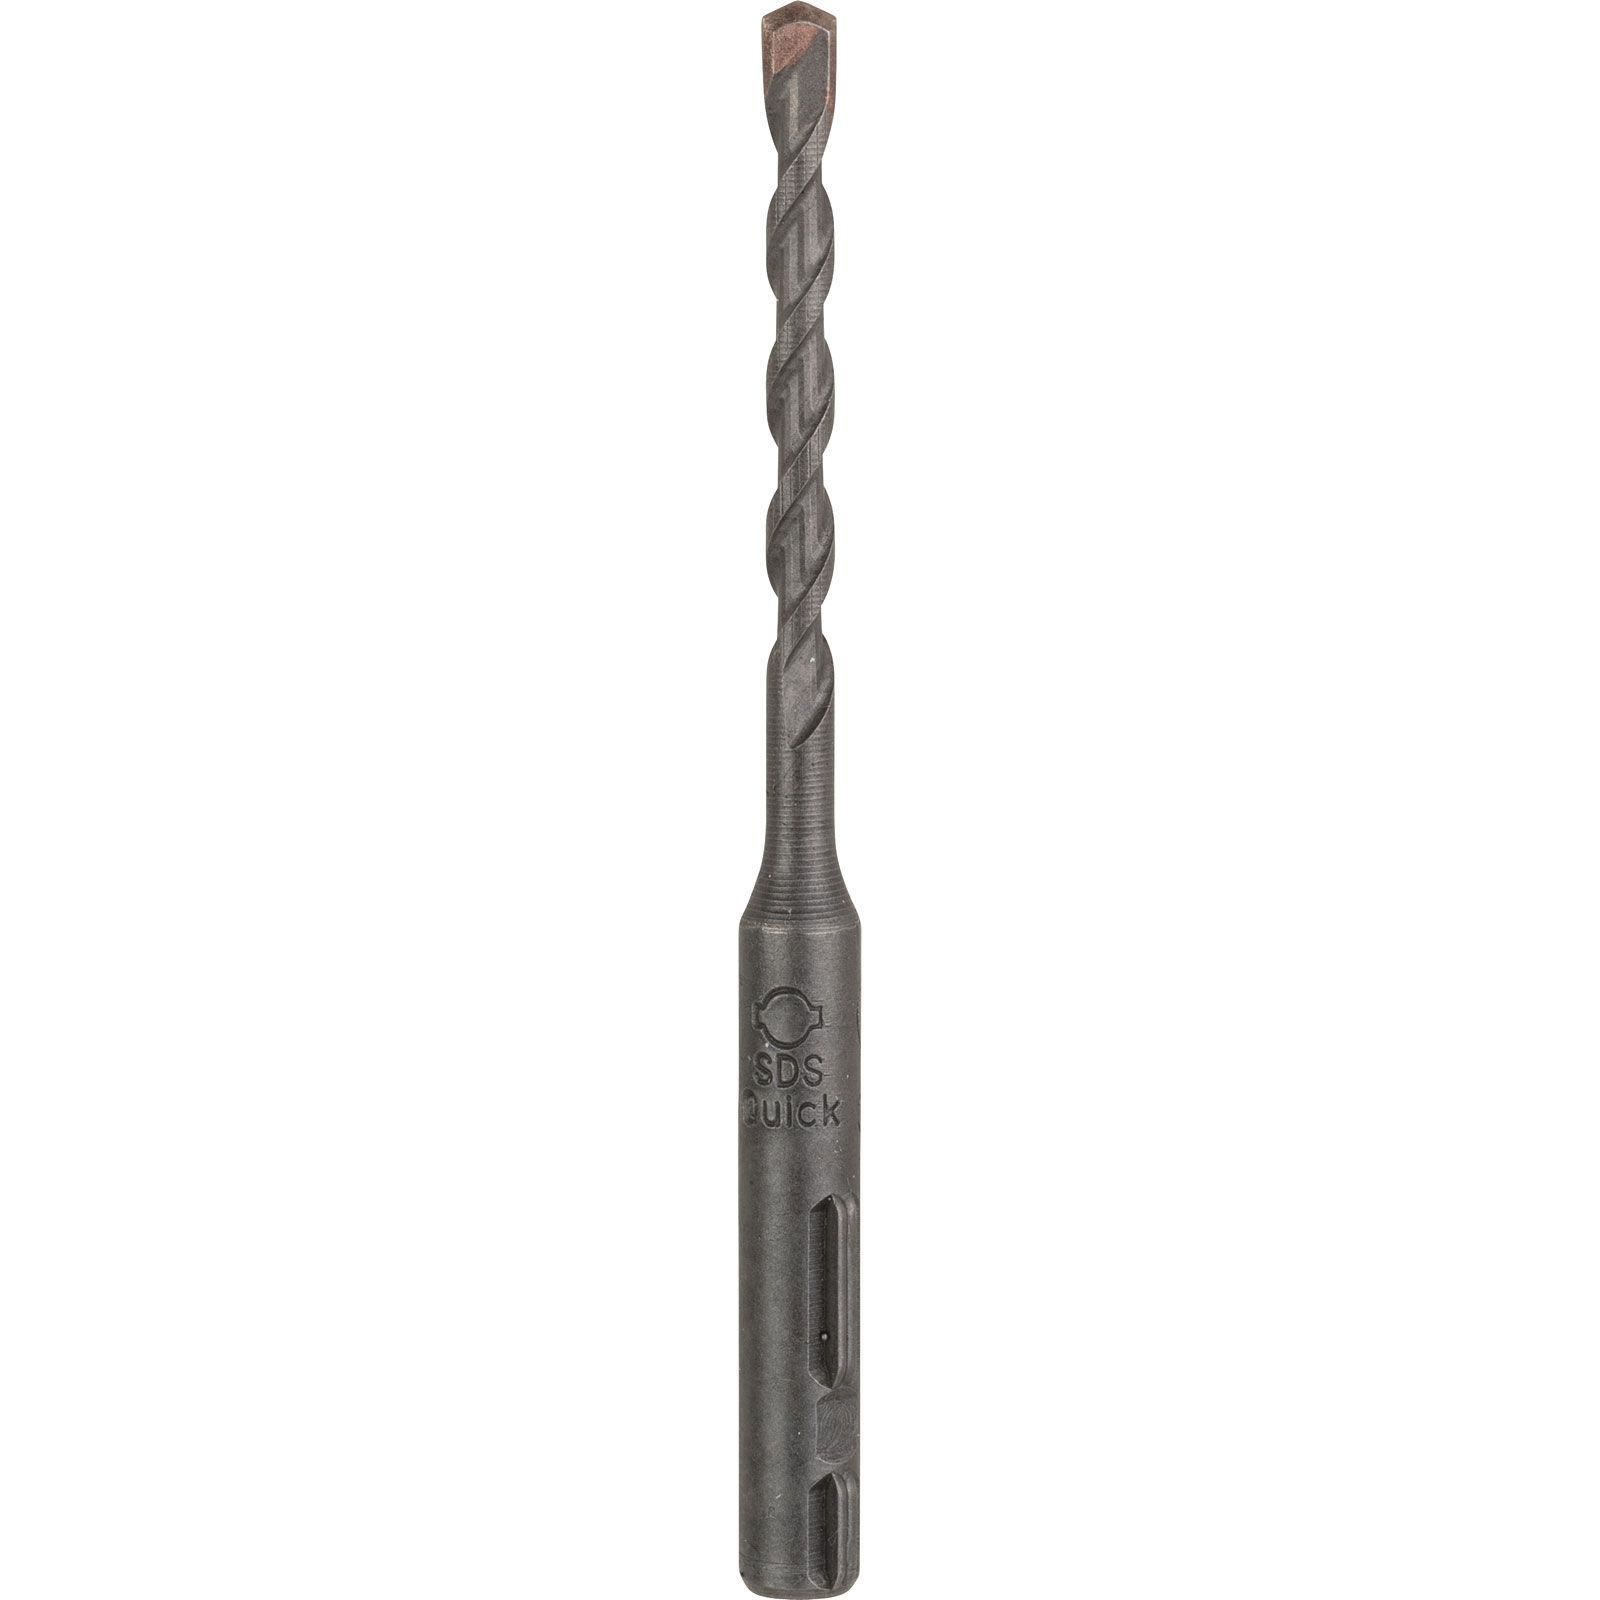 Image of Bosch UNEO SDS Quick Masonary Drill Bit 4mm 85mm Pack of 1